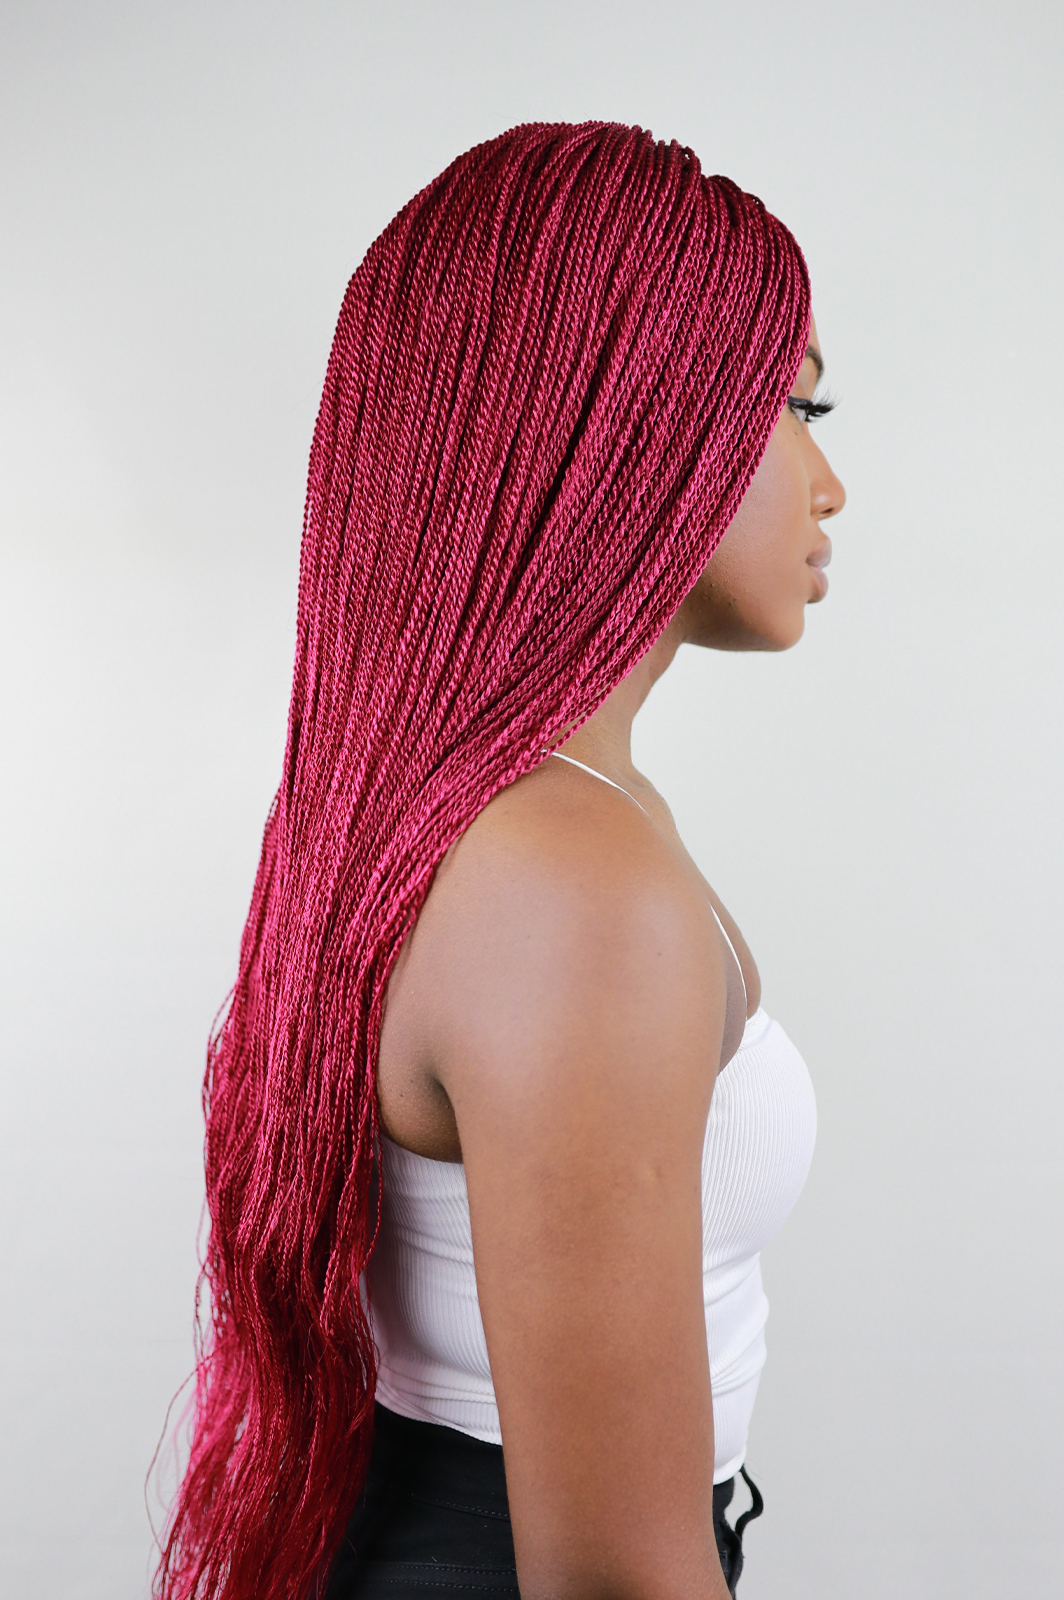 Omalicha Hot Pink Synthetic Fibre Braided Wig